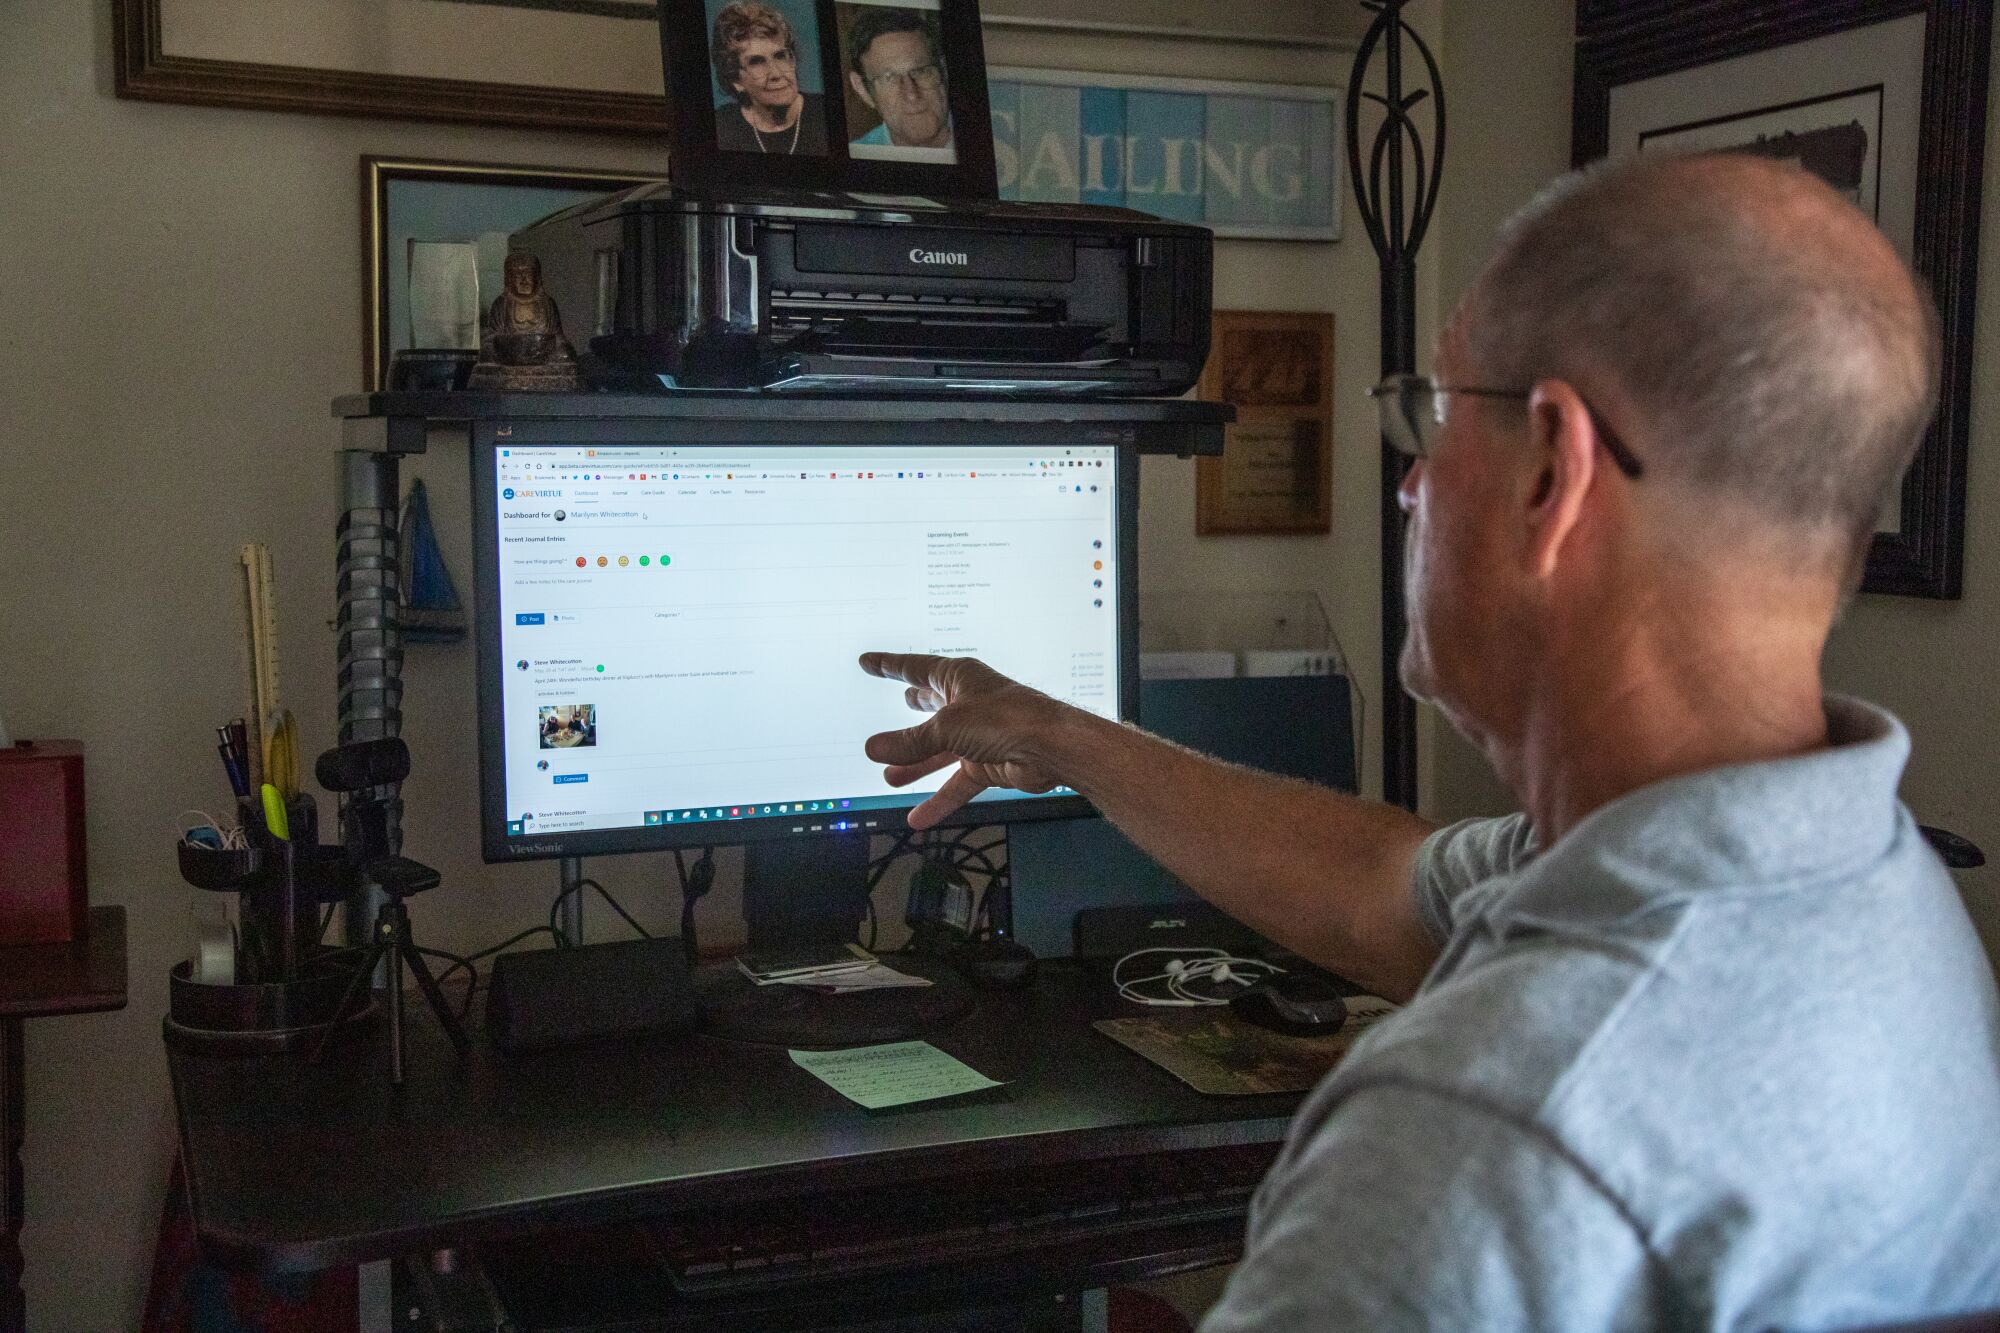 Steve Whitecotton uses software developed for dementia and Alzheimer's caregivers to care for his wife Marilynn.